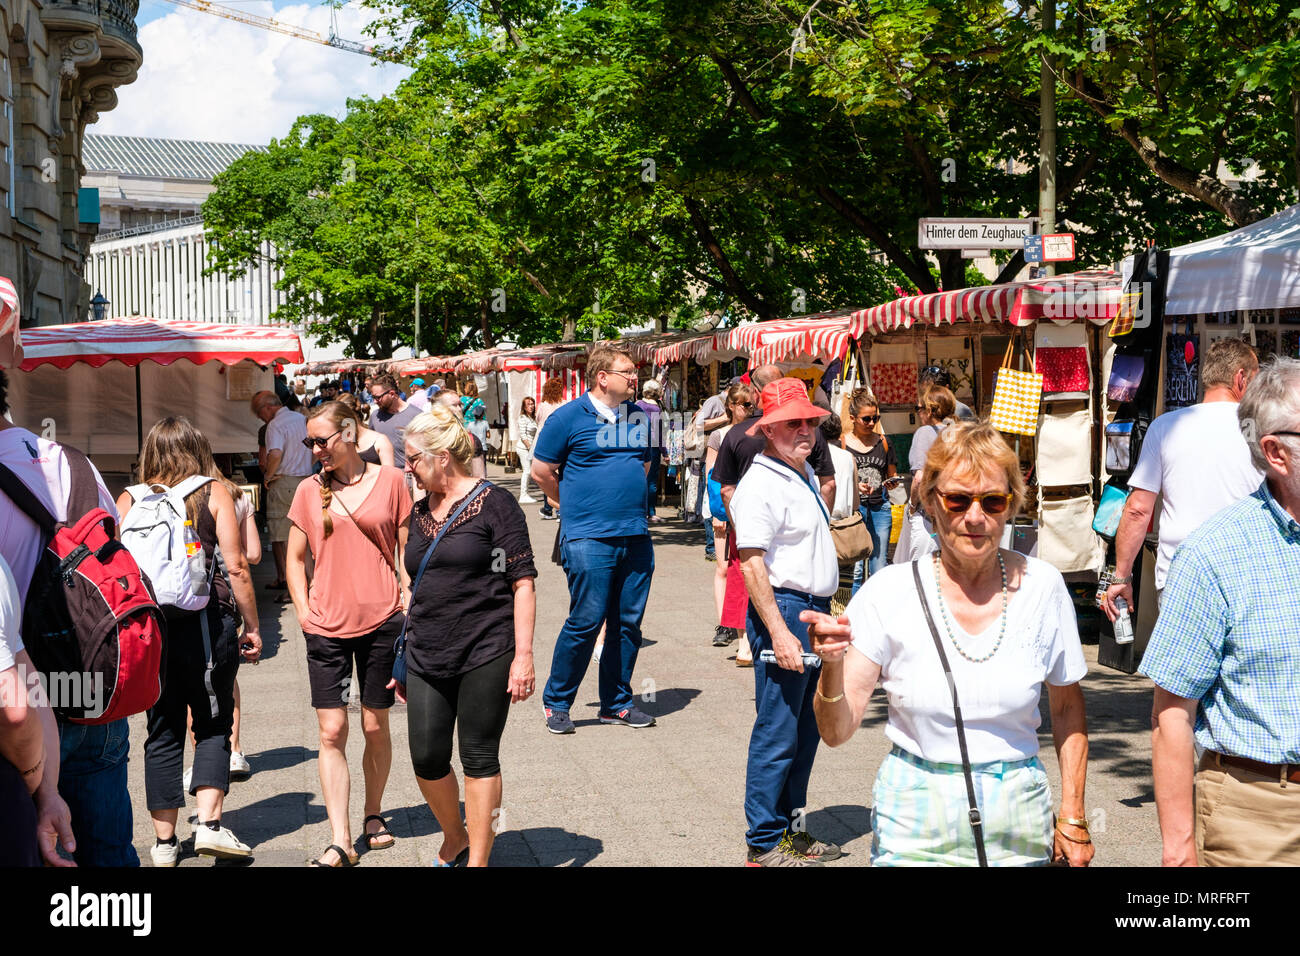 Berlin, Germany - may 2018: People at the art market / flea market at Zeughaus near Museum Island on a sunny day in Berlin, Germany Stock Photo